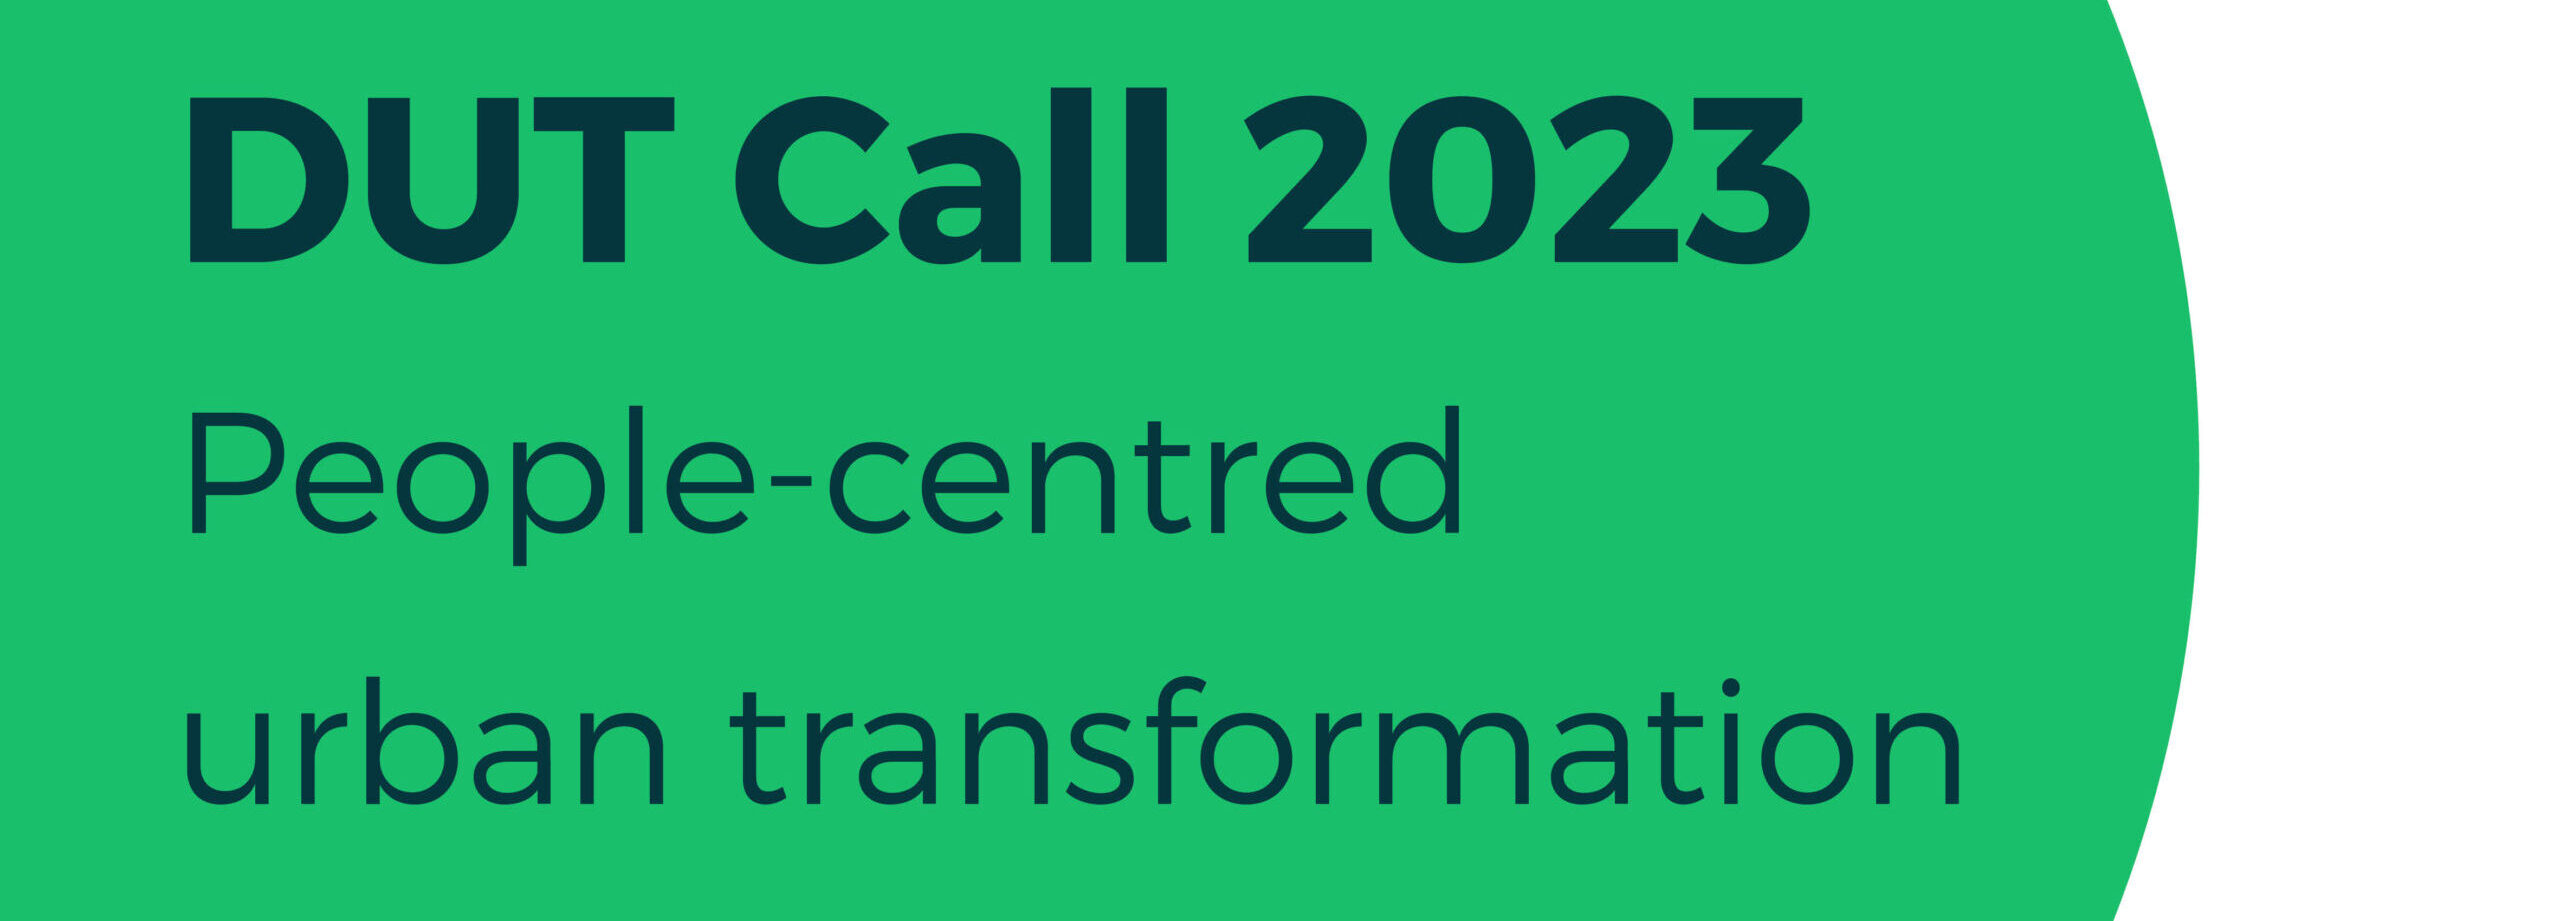 DRIVING URBAN TRANSITIONS call 2023: First information available